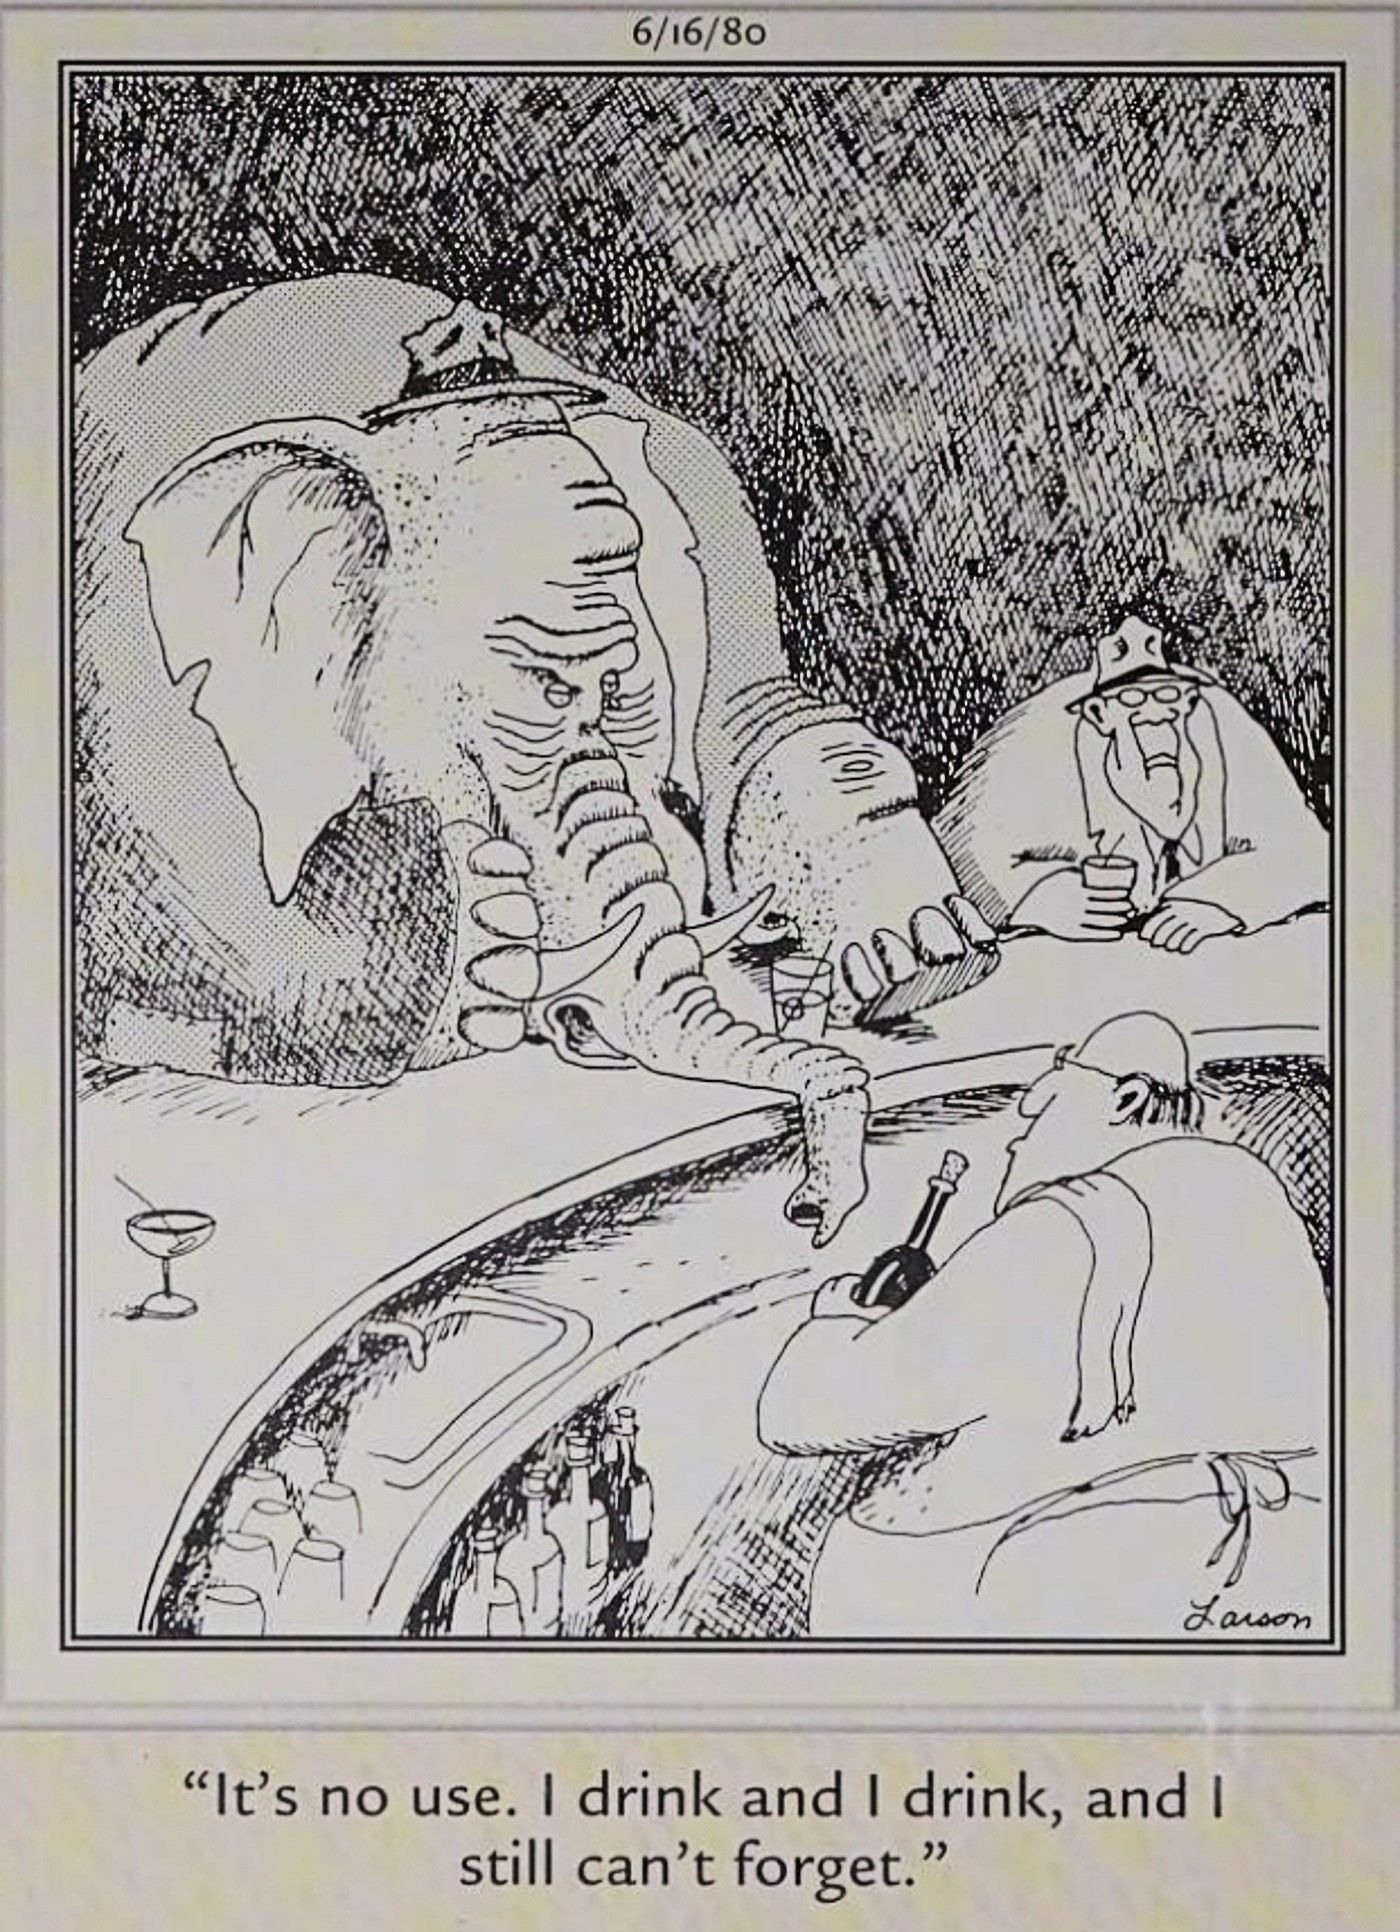 Far Side, elephant drinking to forget but can't